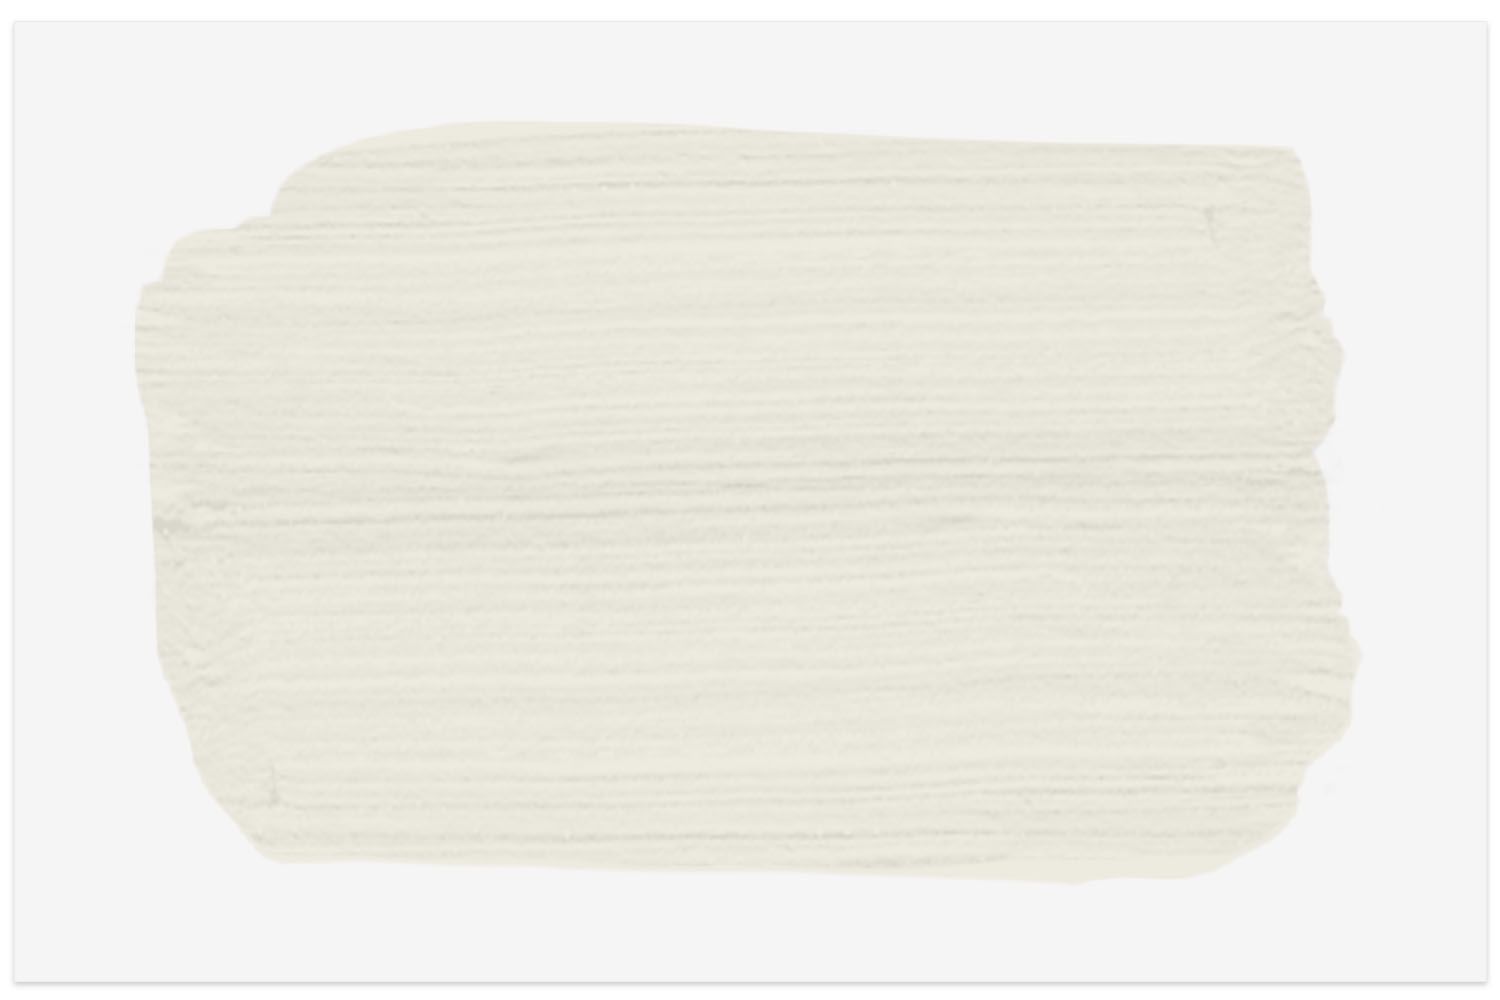 Sherwin-Williams Alabaster paint swatch